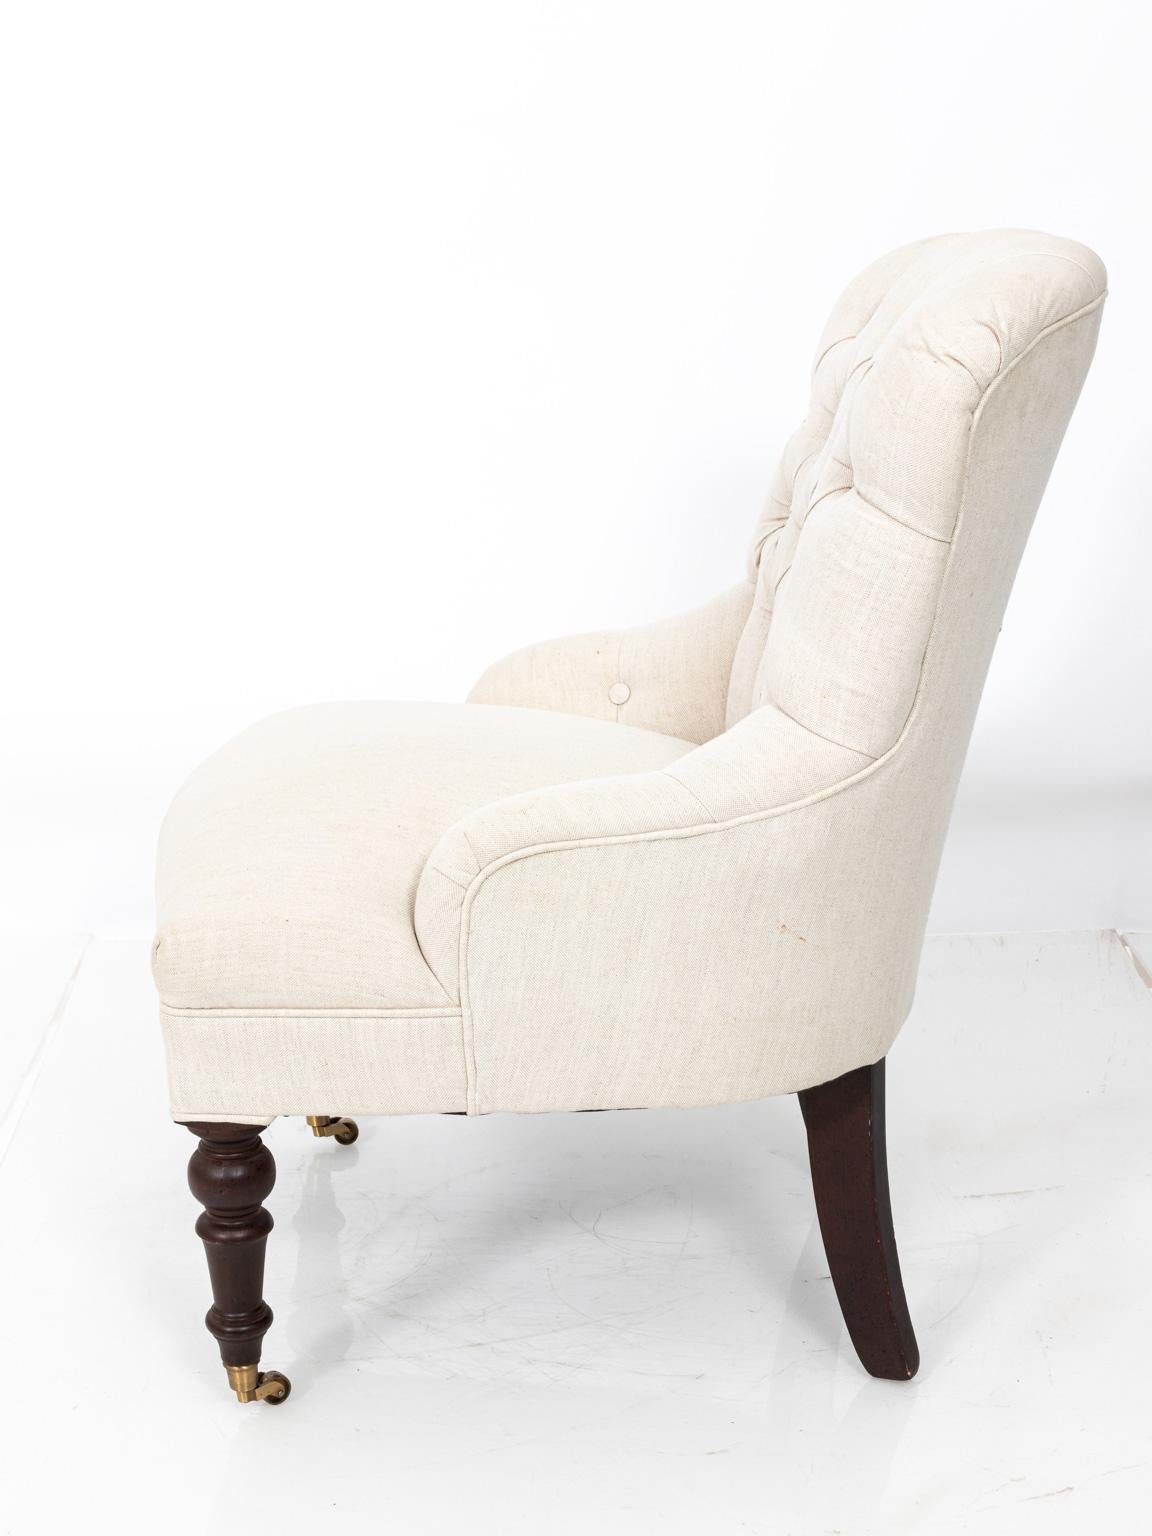 Upholstered slipper side chair with tufted button seating. Please note of wear consistent with age.